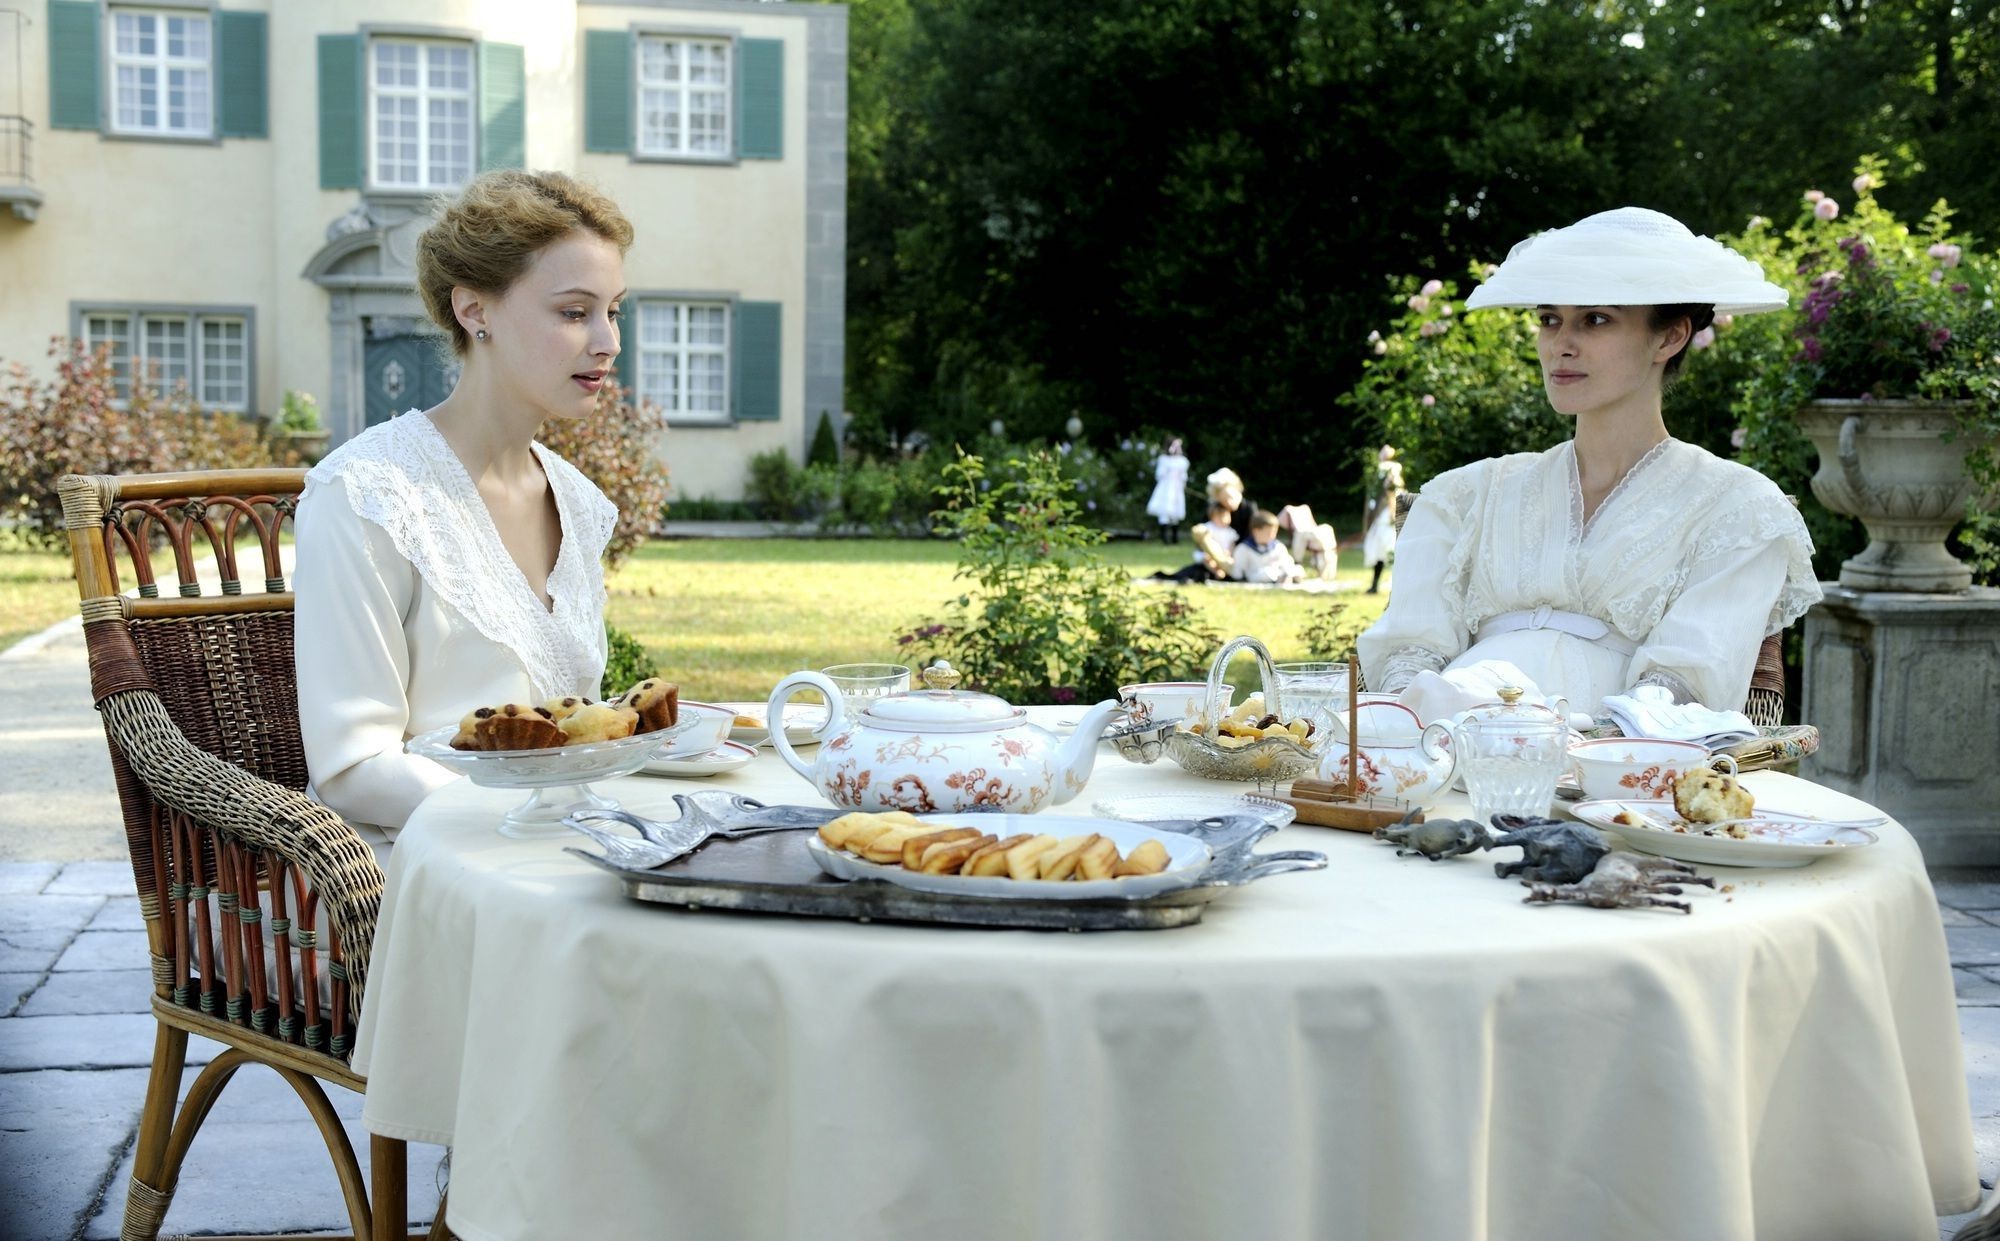 Sarah Gadon stars as Emma Jung and Keira Knightley stars as Sabina Spielrein in Sony Pictures Classics' A Dangerous Method (2011)